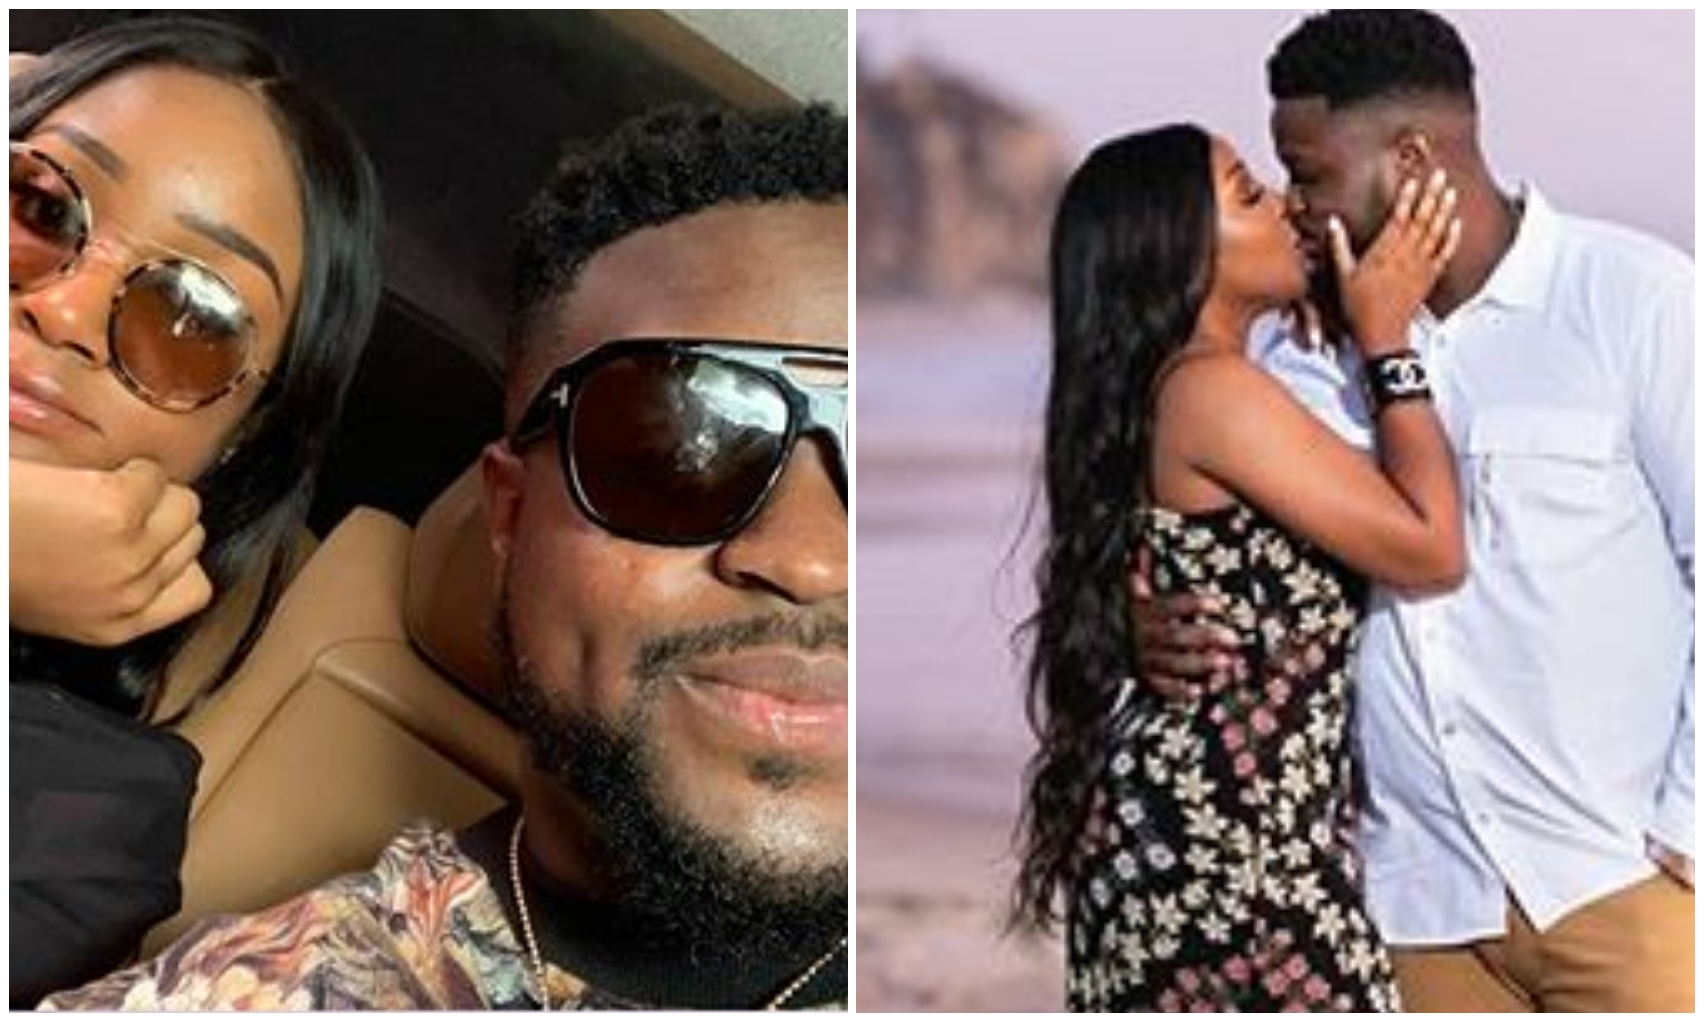 Davido's sister-in-law, Ekanem reacts to news that their marriage is in crisis